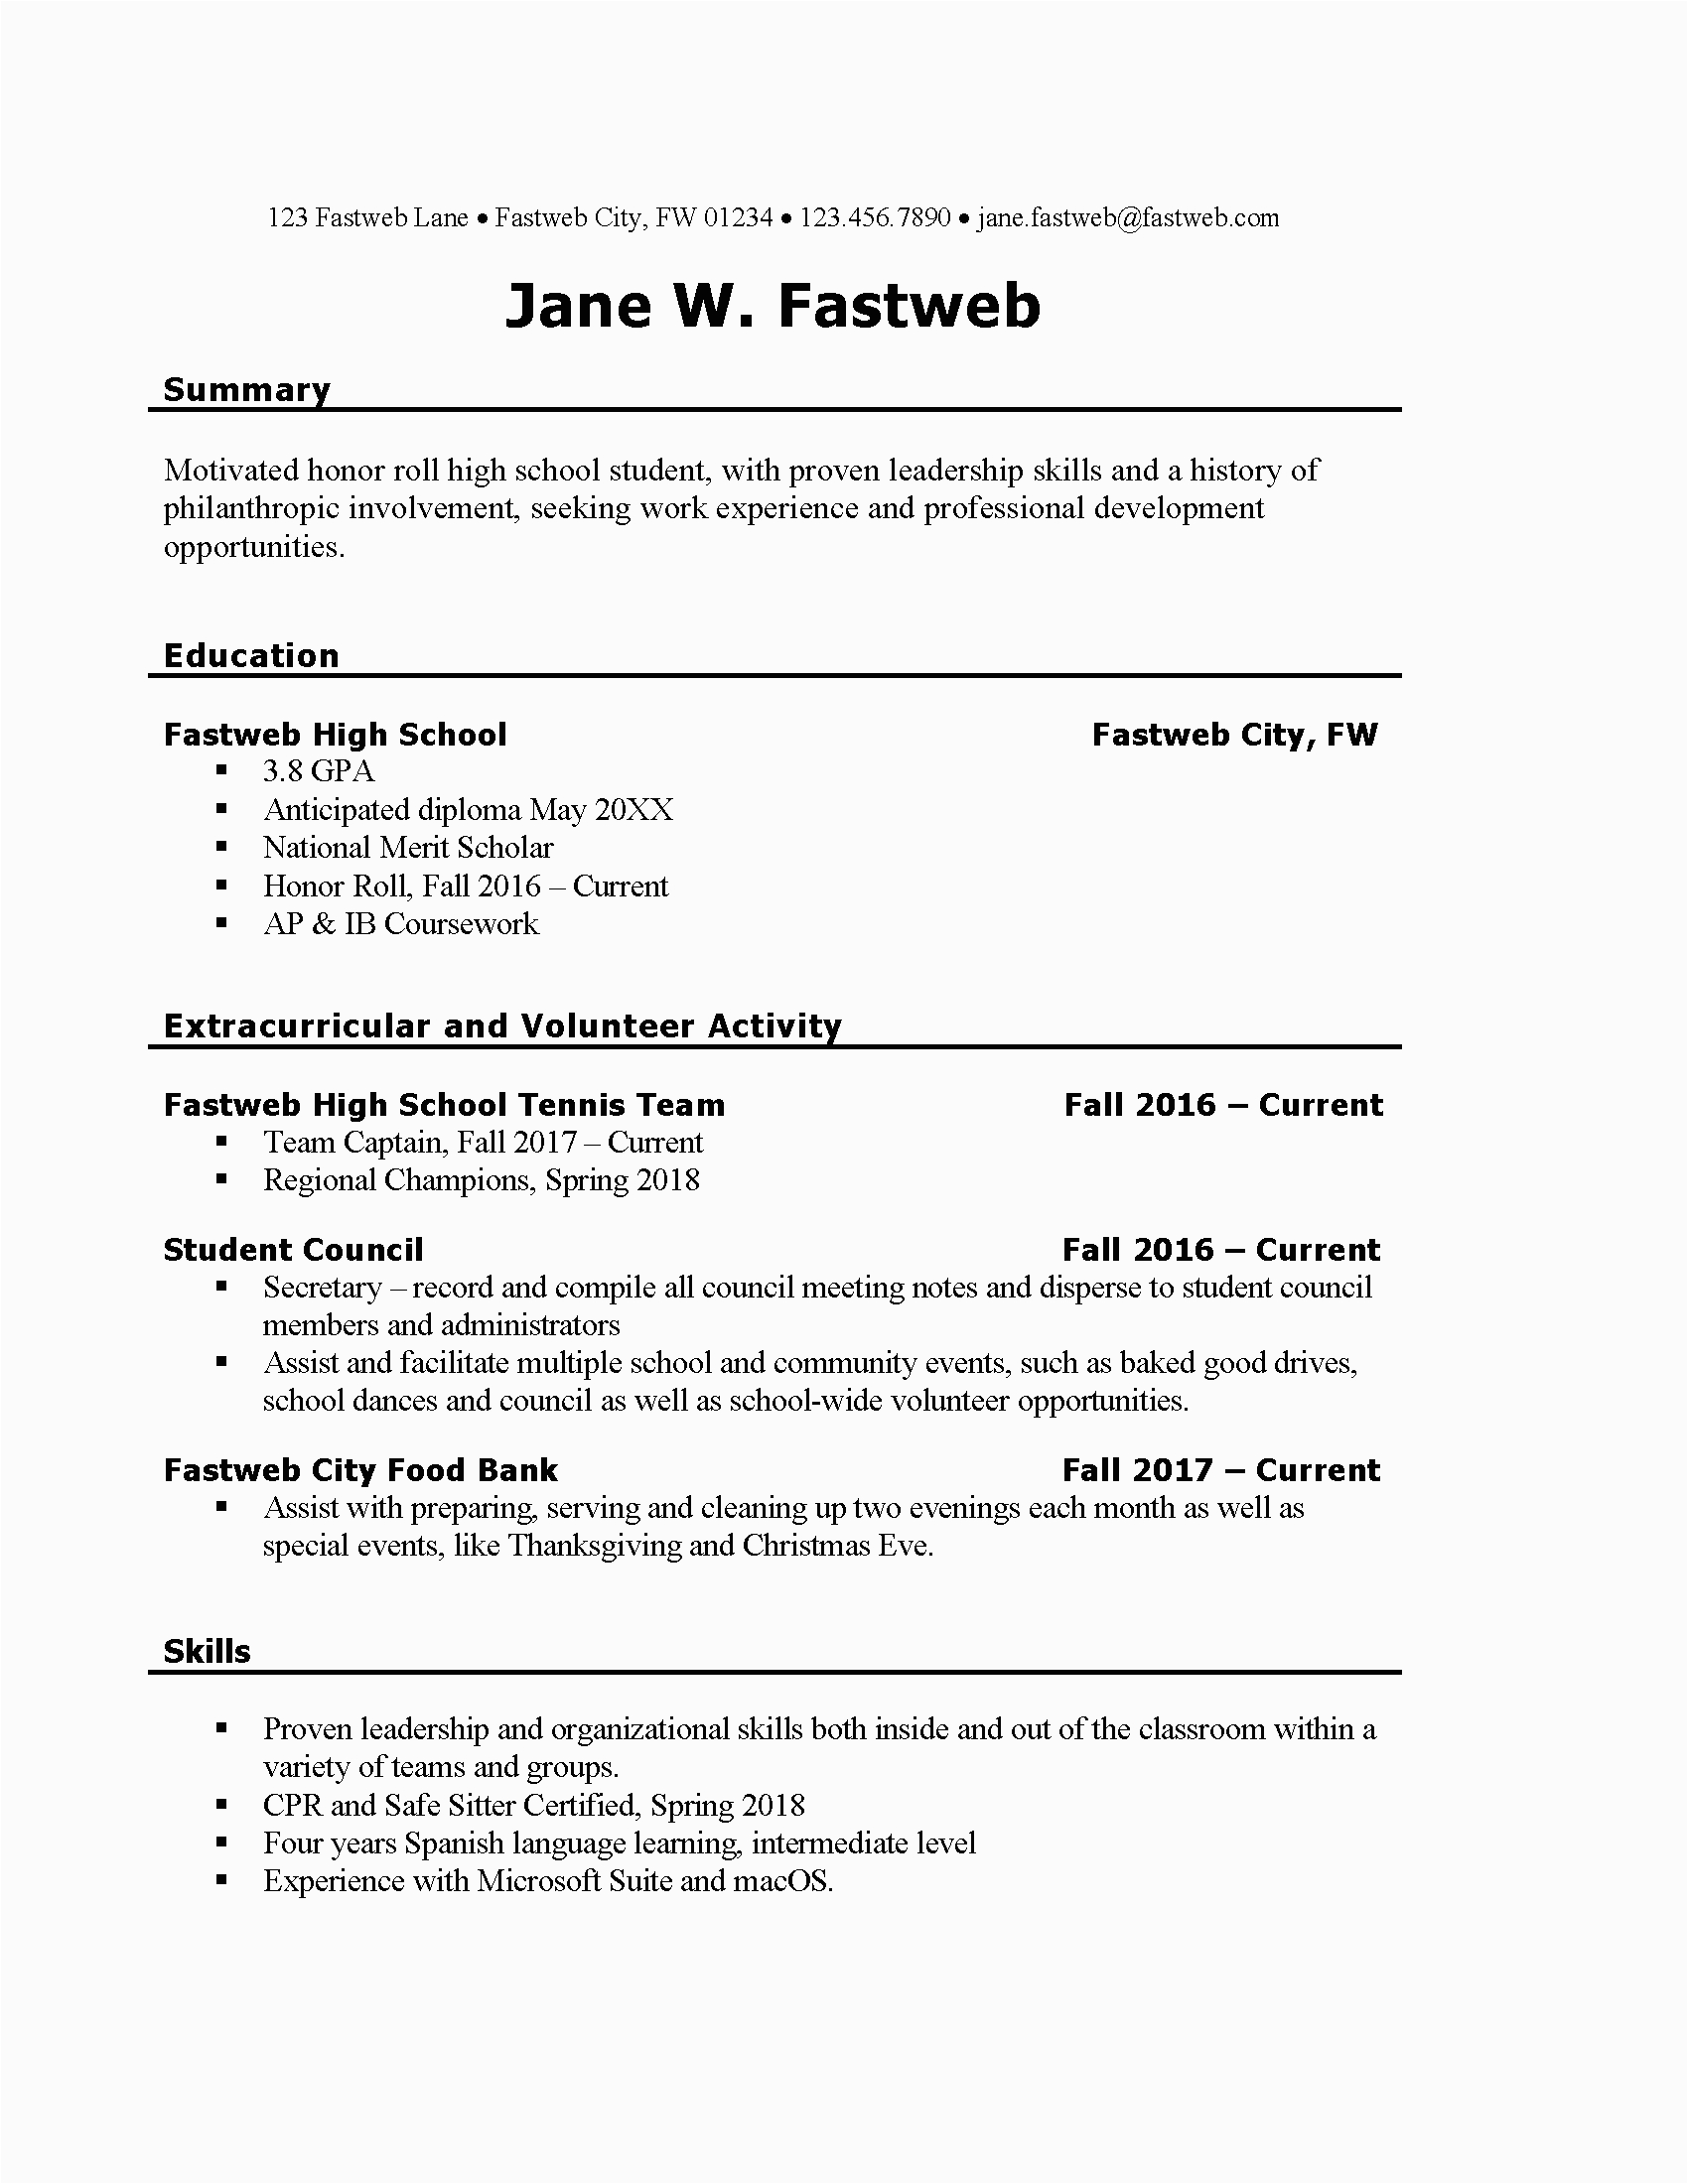 Resume for Part Time Job Student Sample Canada First Part Time Job Resume Sample